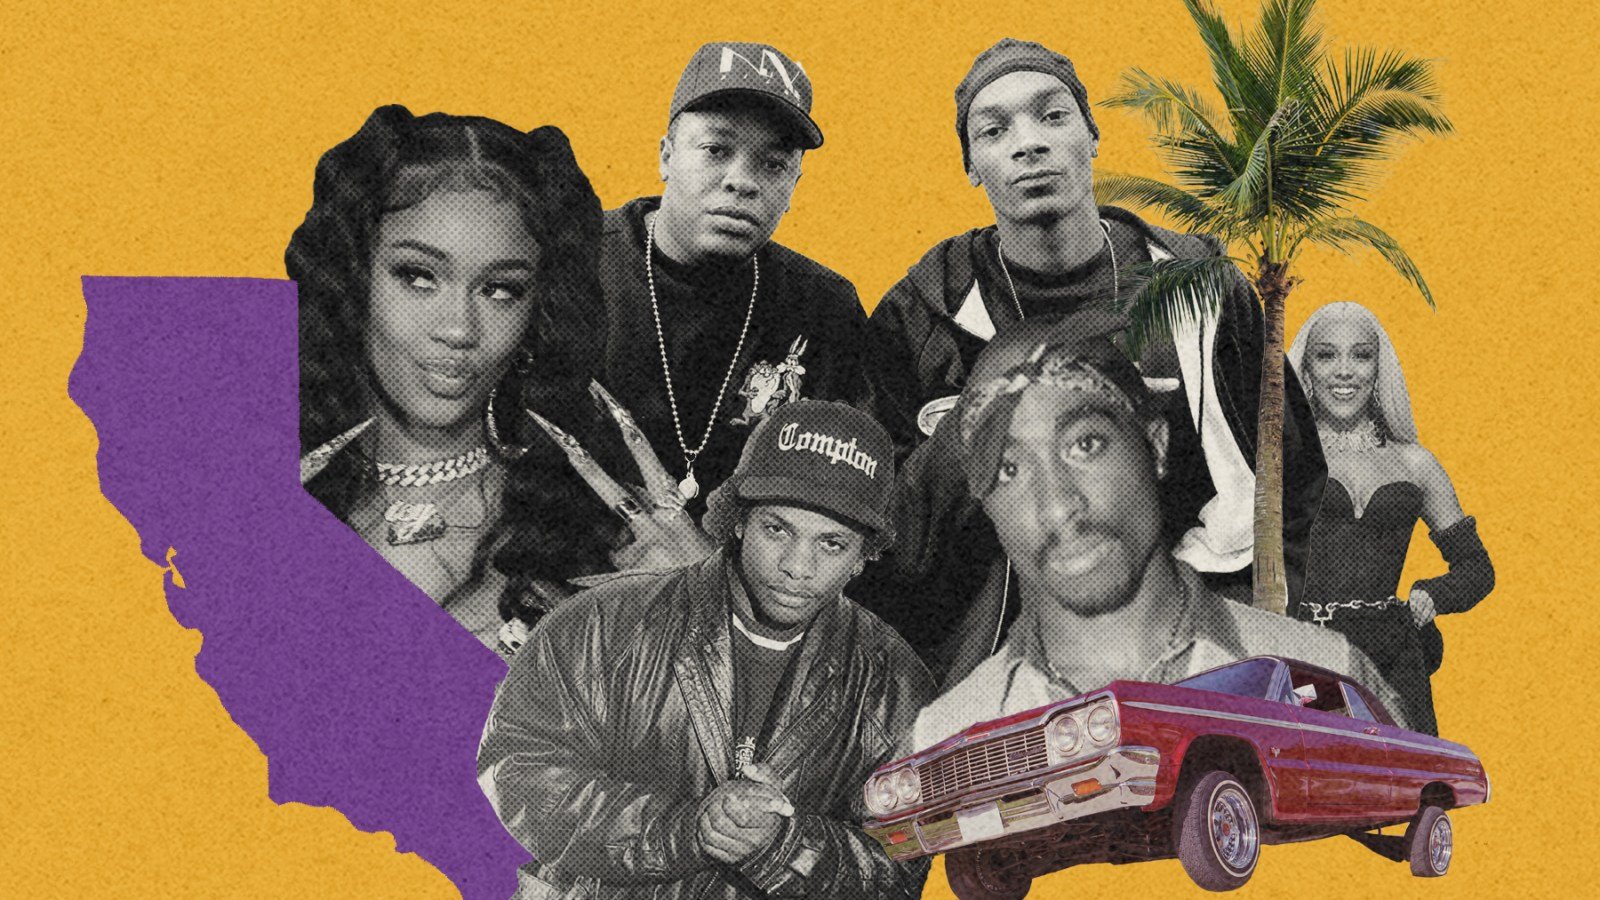 The 100 Greatest West Coast Hip-Hop Songs of All Time